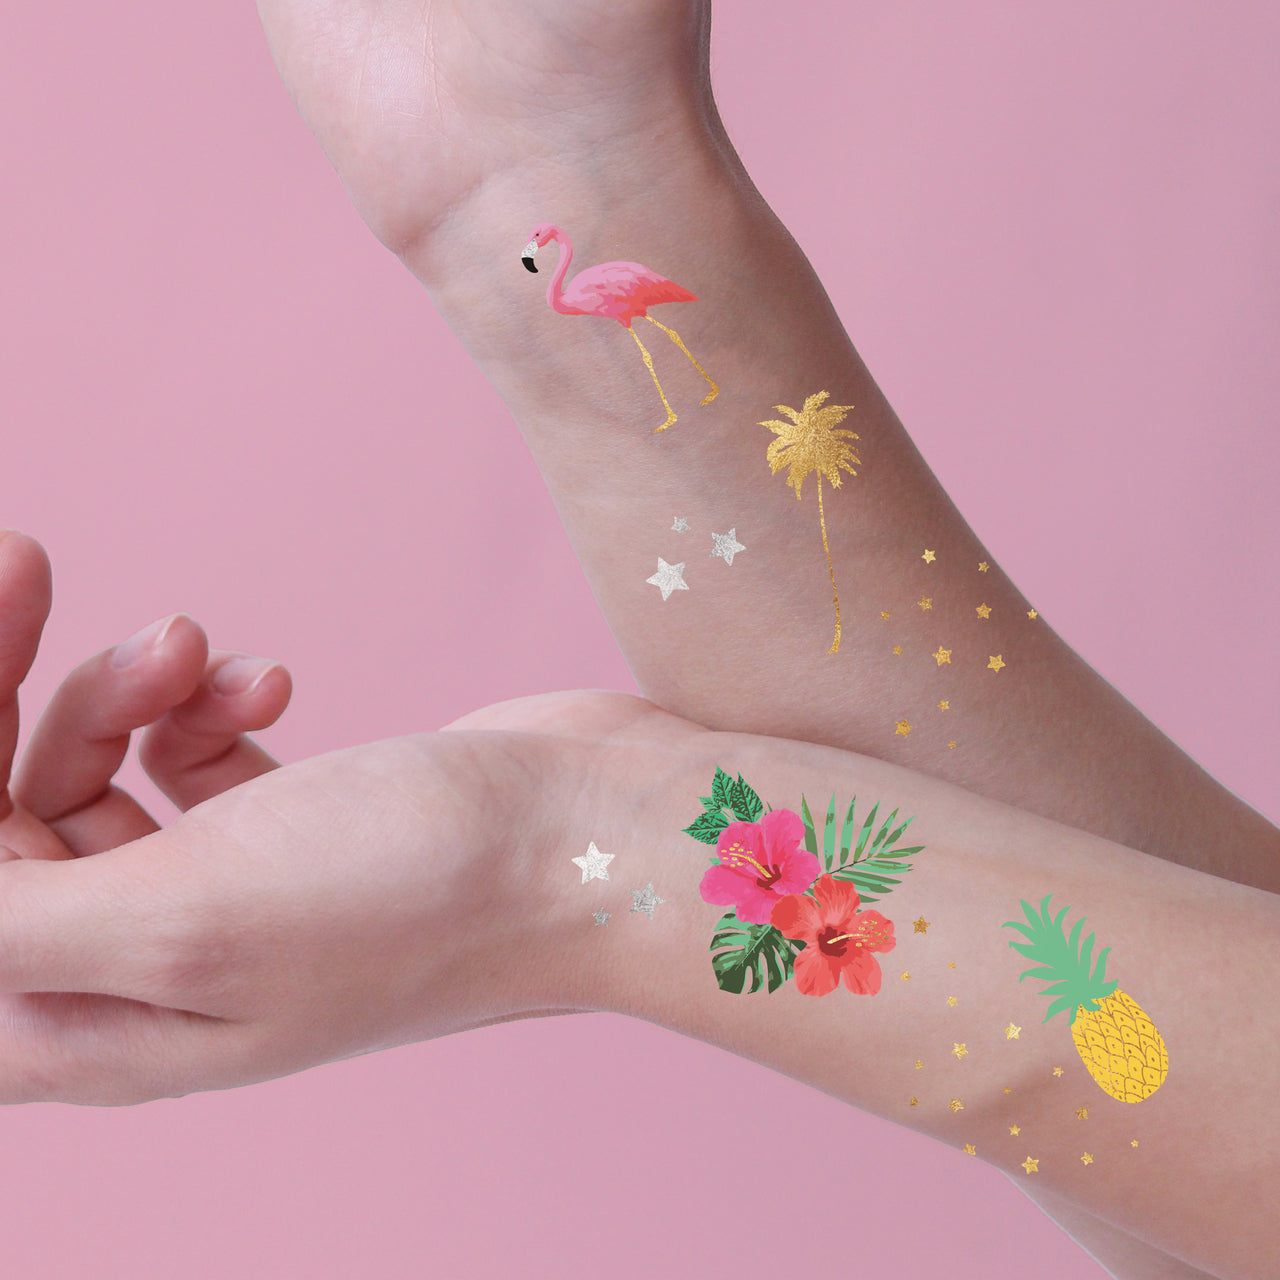 Sparkle all summer long in the Forever Summer tattoo bundle. Metallic temporary tropical tattoos: flamingo, pineapple, palm tree, hibiscus flower